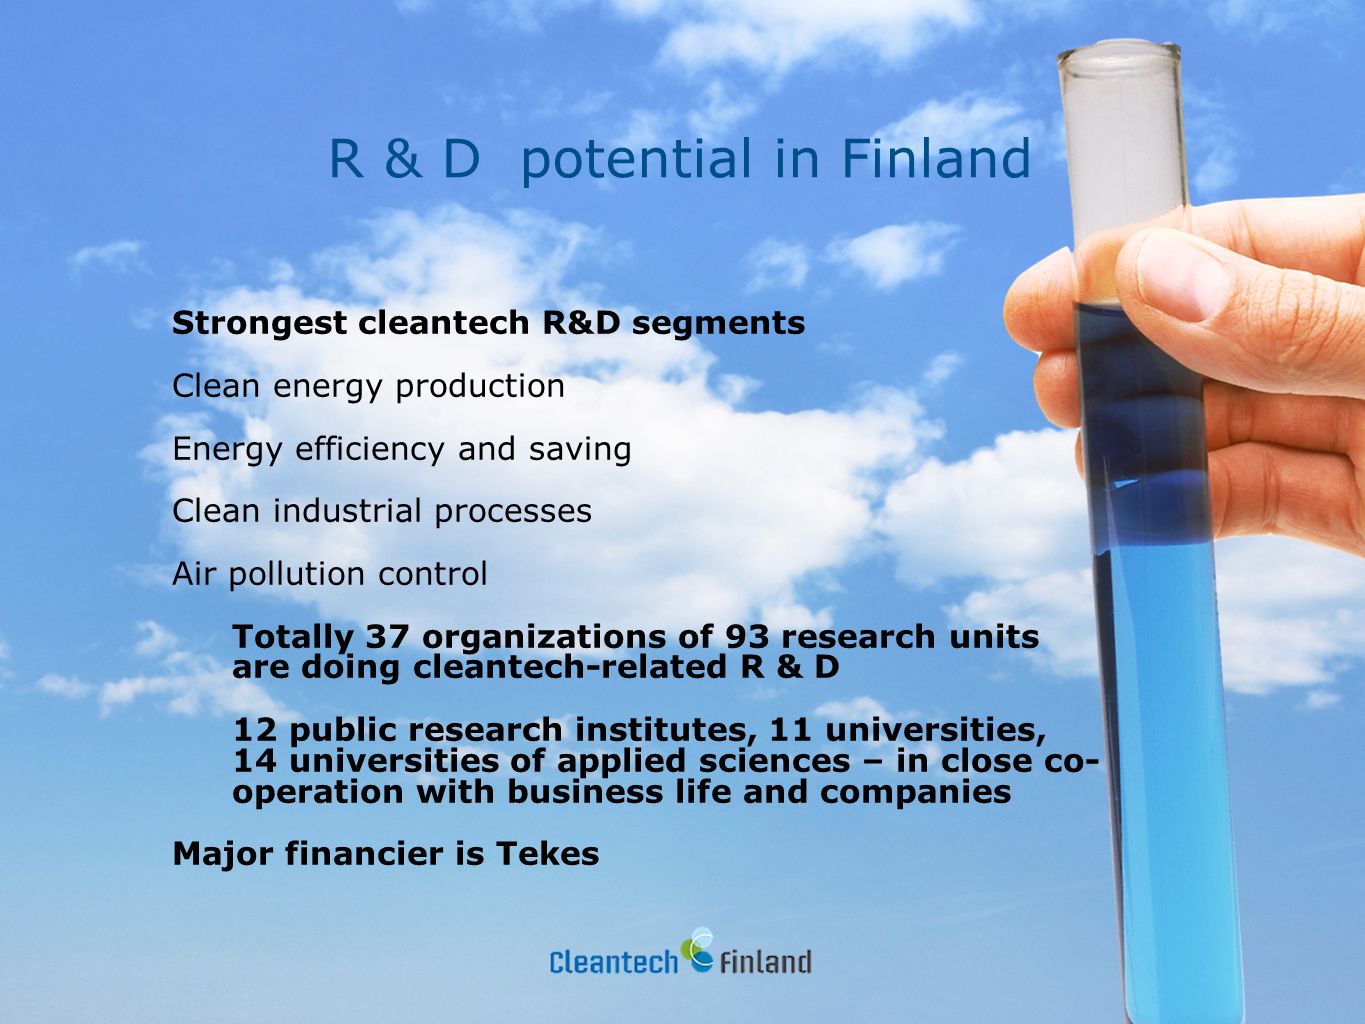 R & D potential in Finland Strongest cleantech R&D segments Clean energy production Energy efficiency and saving Clean industrial processes Air pollution control Totally 37 organizations of 93 research units are doing cleantech-related R & D 12 public research institutes, 11 universities, 14 universities of applied sciences – in close co- operation with business life and companies Major financier is Tekes